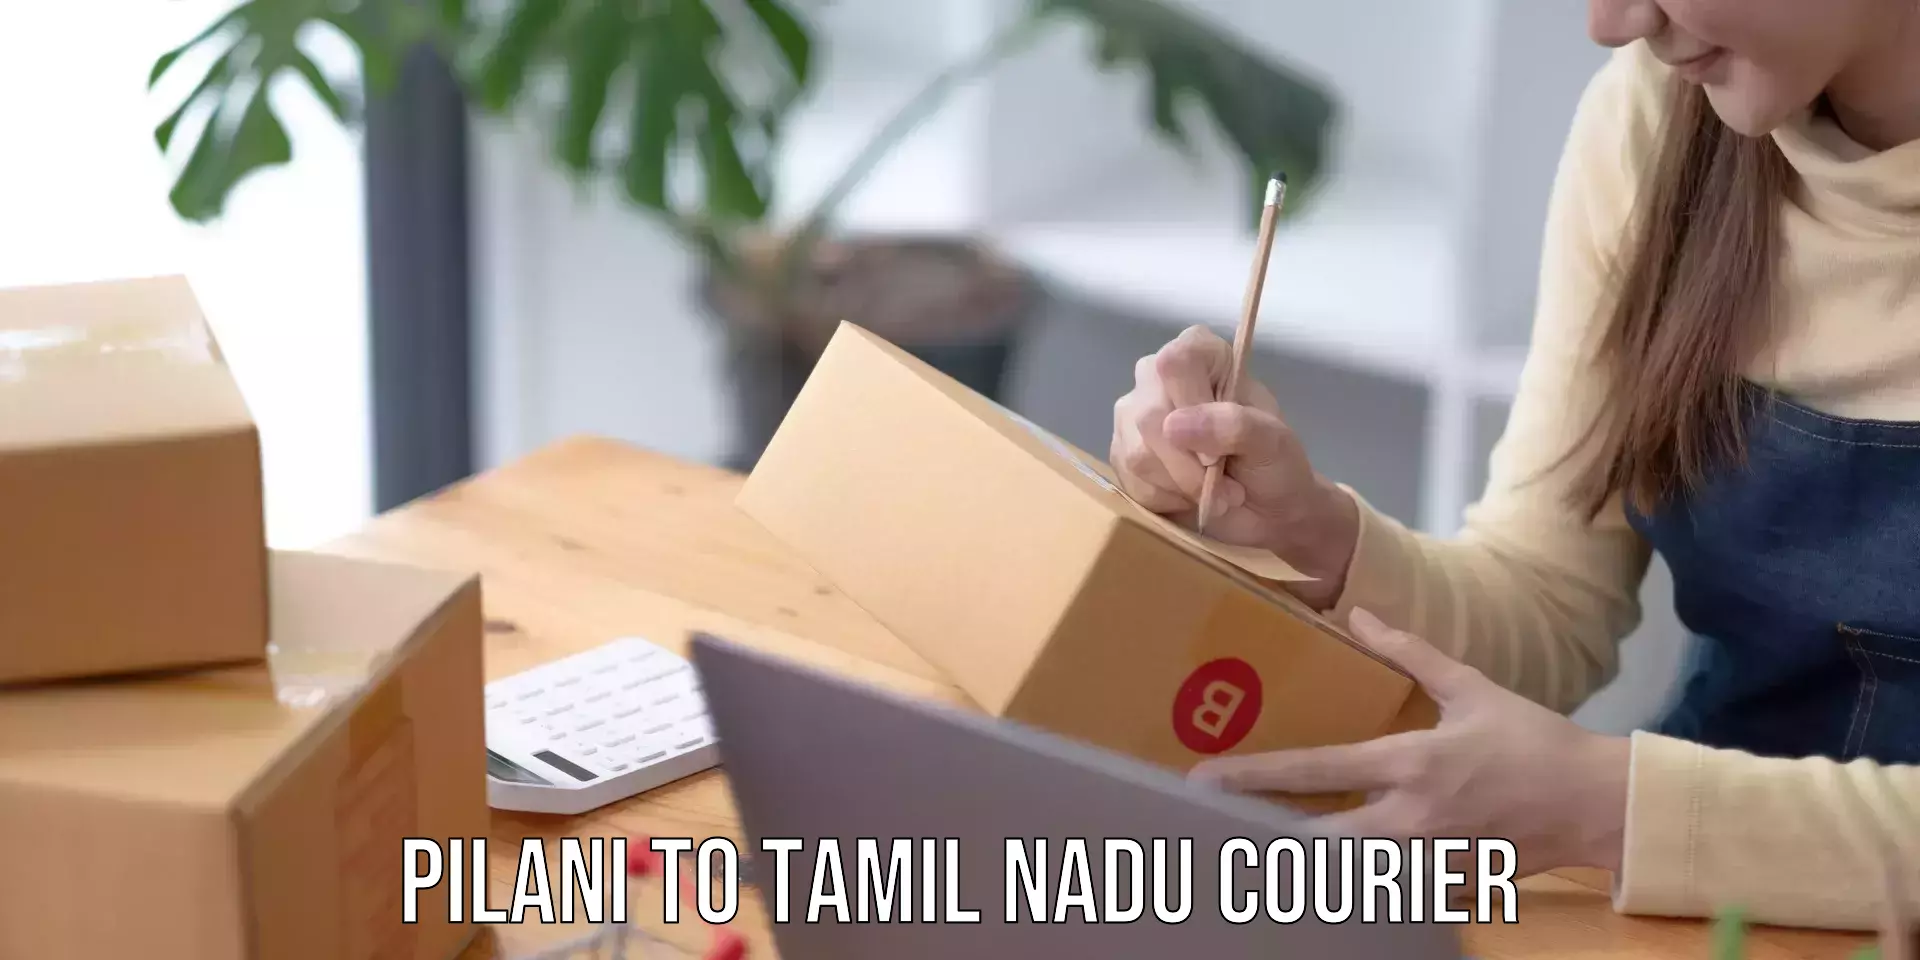 Fast delivery service Pilani to Tamil Nadu